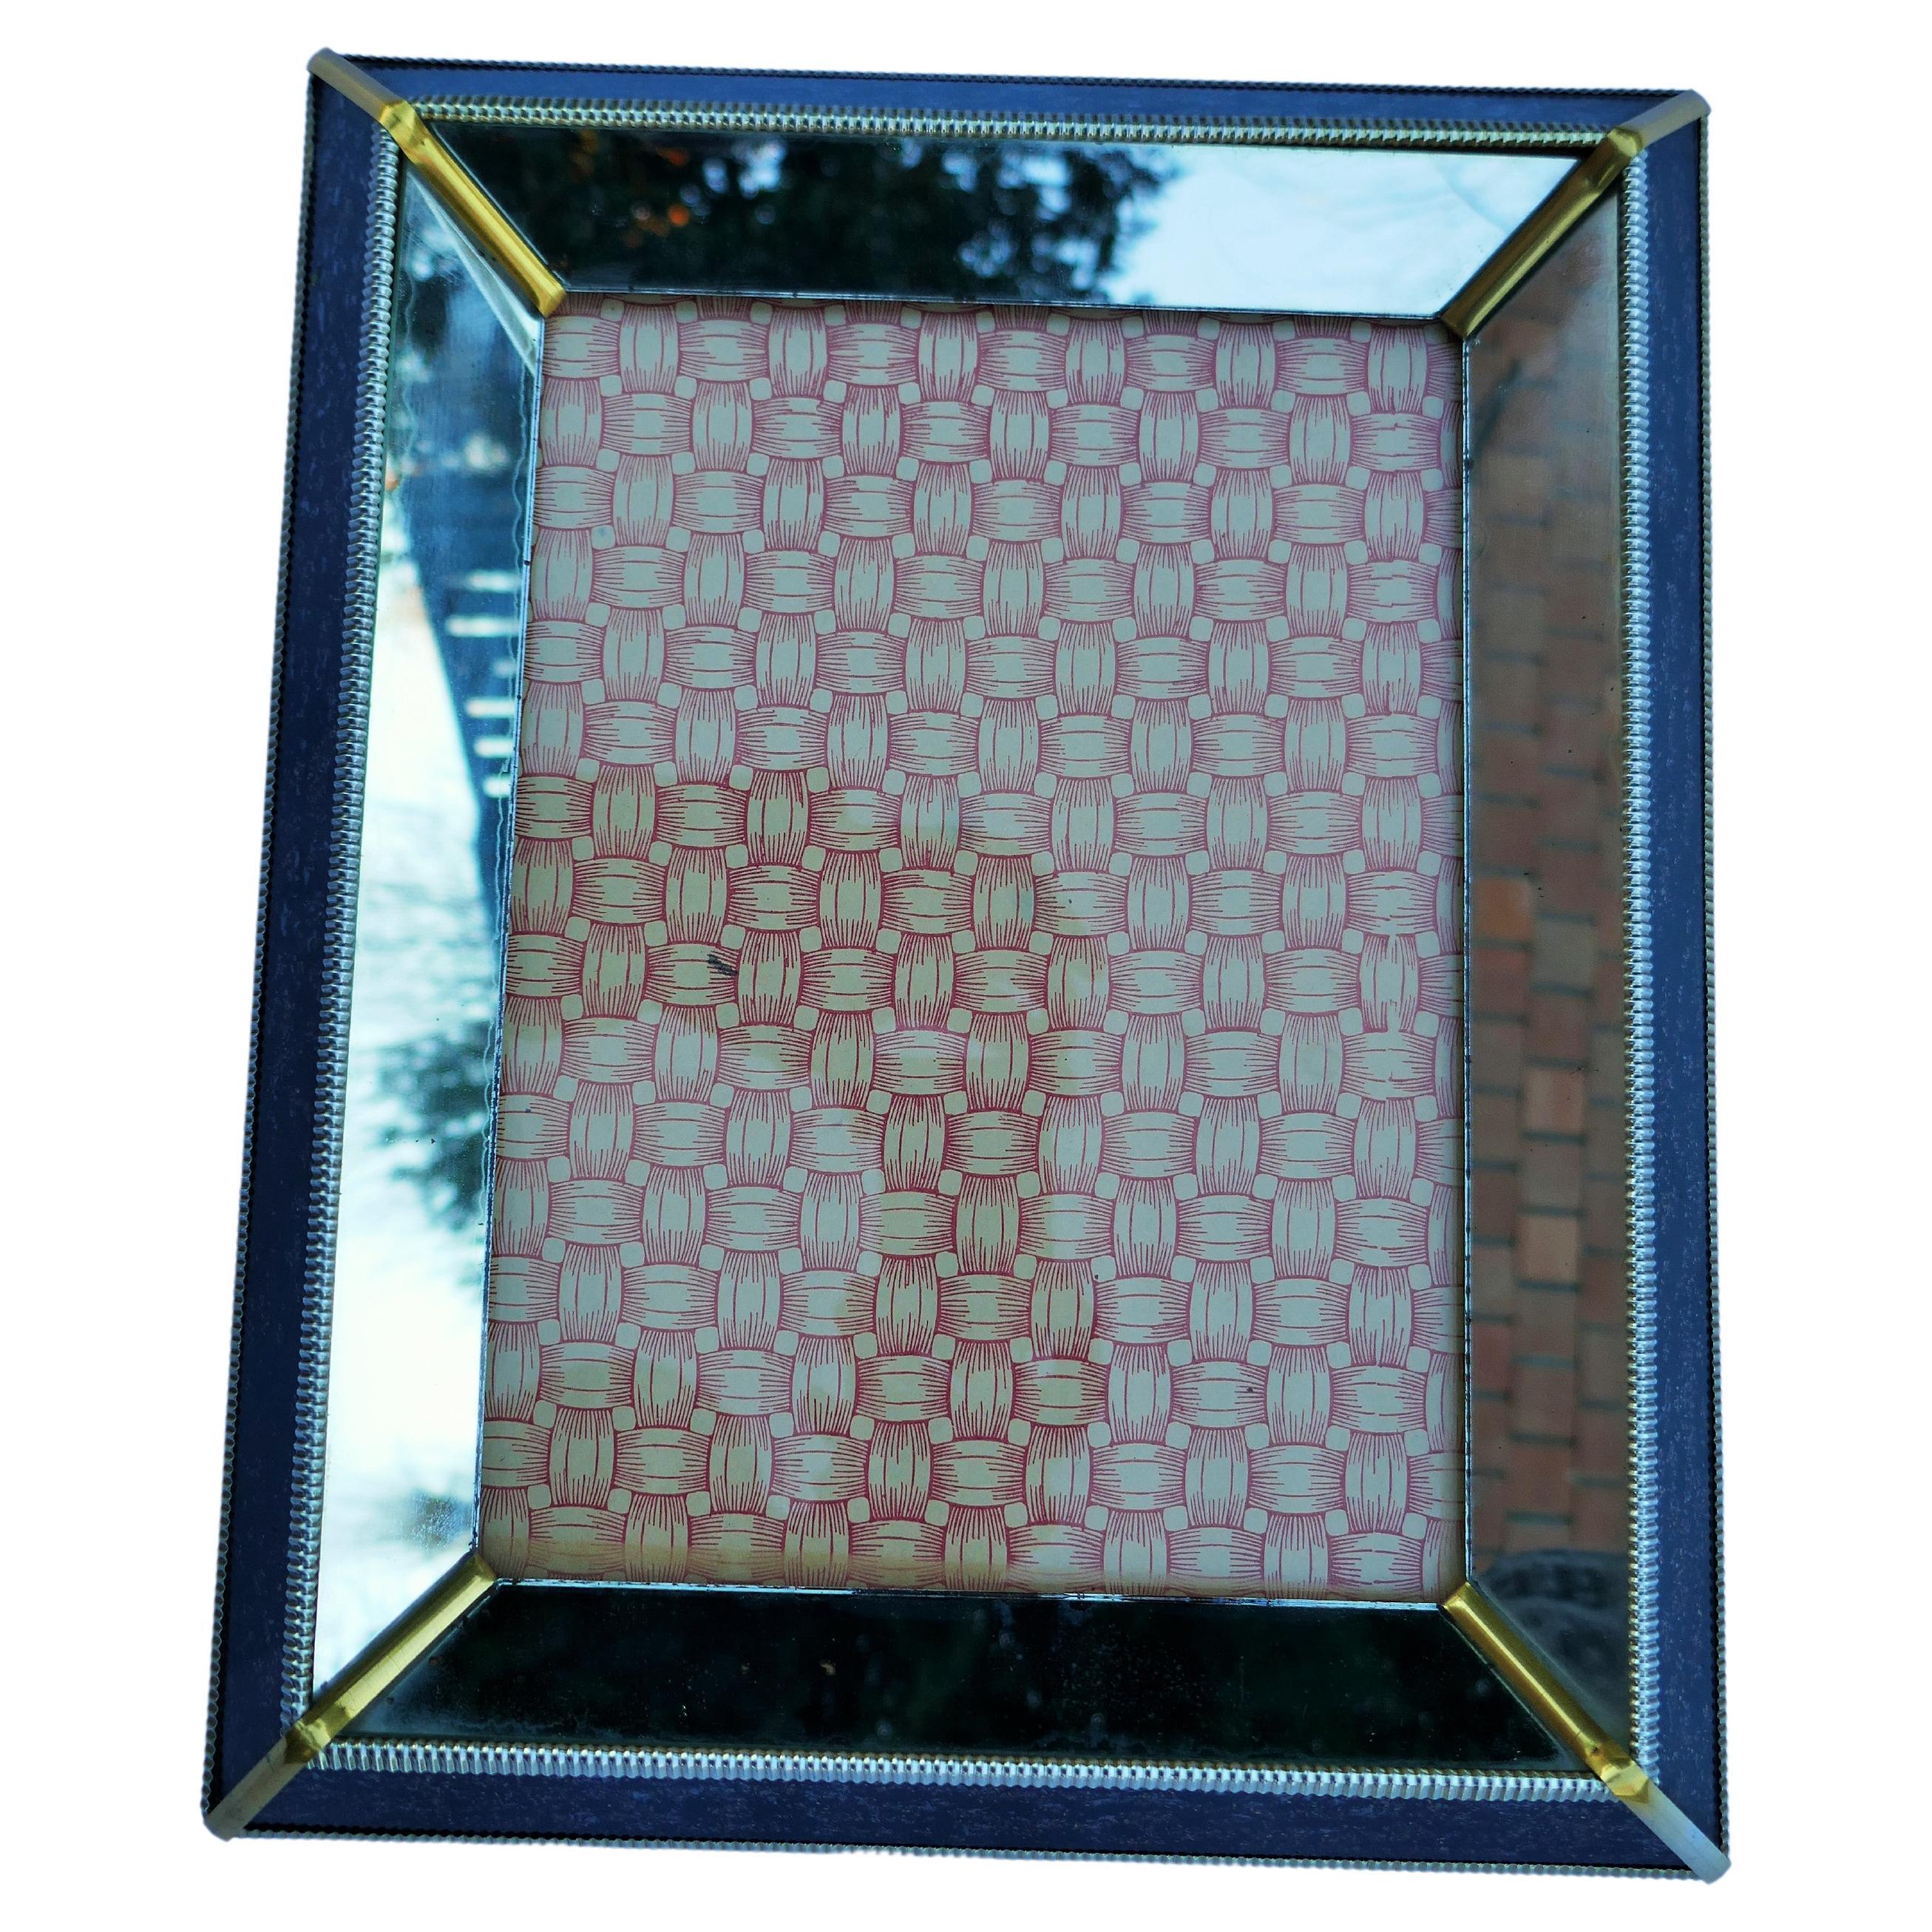 Wood and glass photo frame - Possible Art Deco For Sale